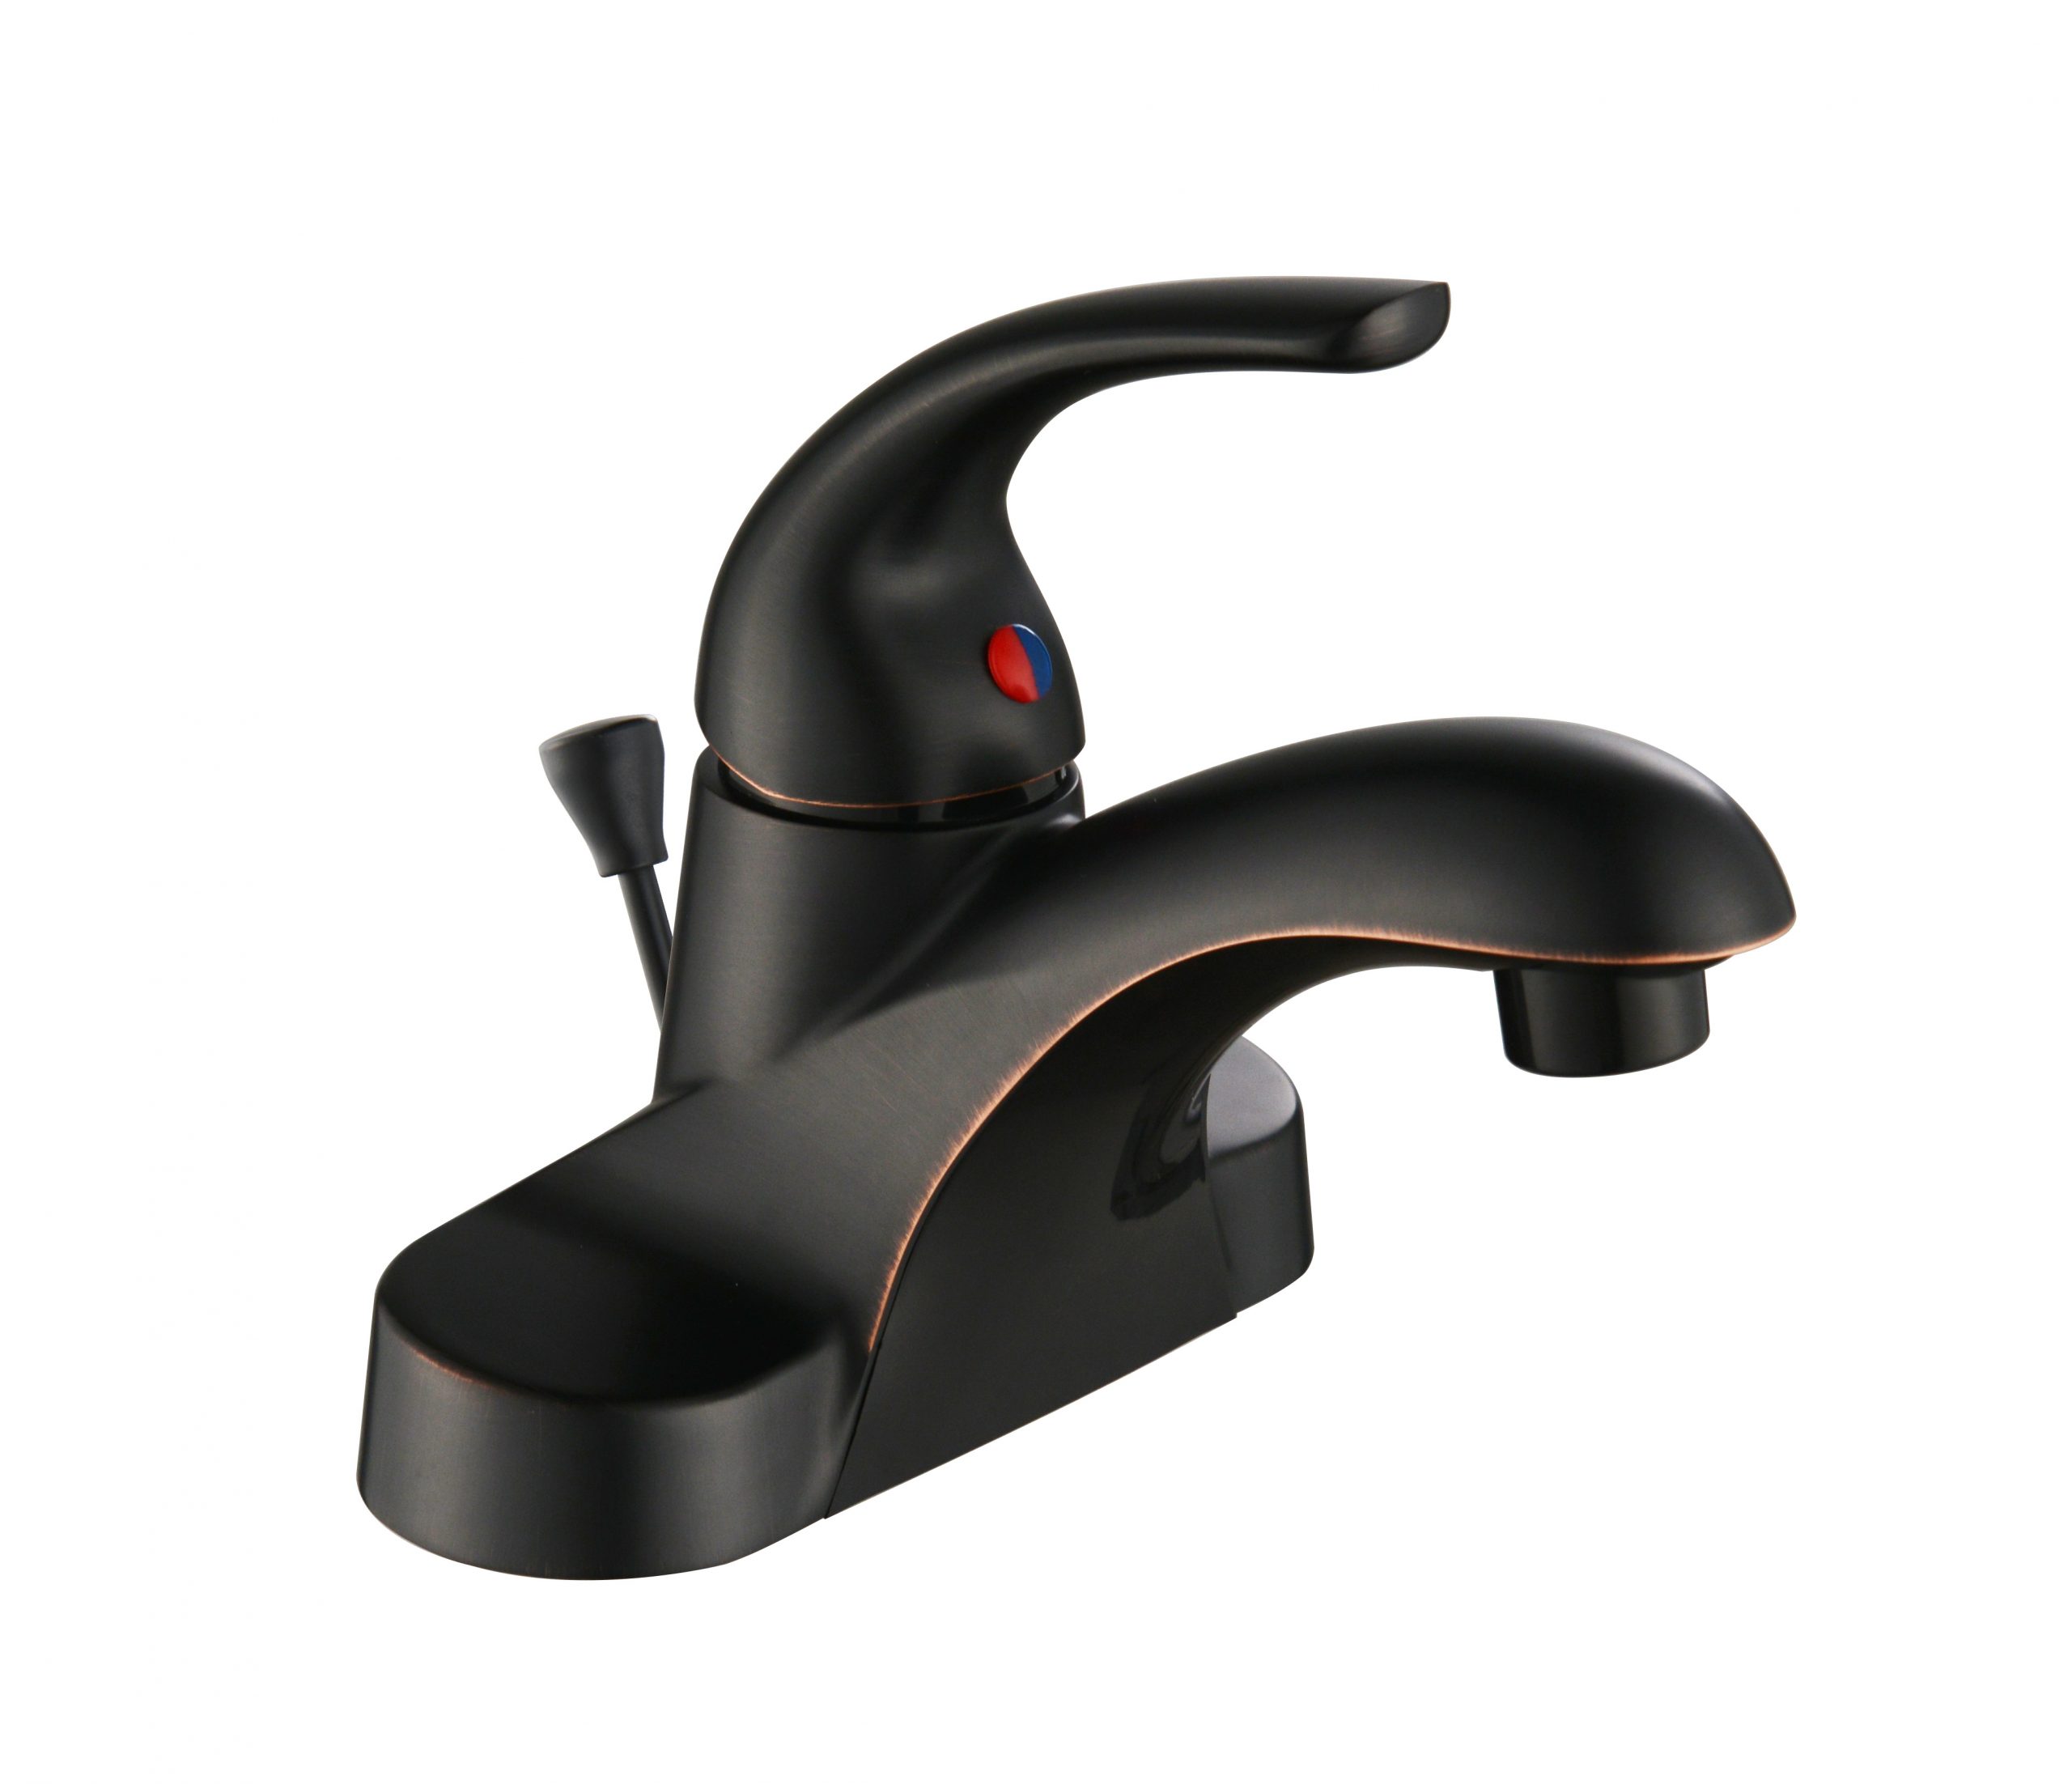 The Best North American Faucet Styles You Should Consider - Blog - 3